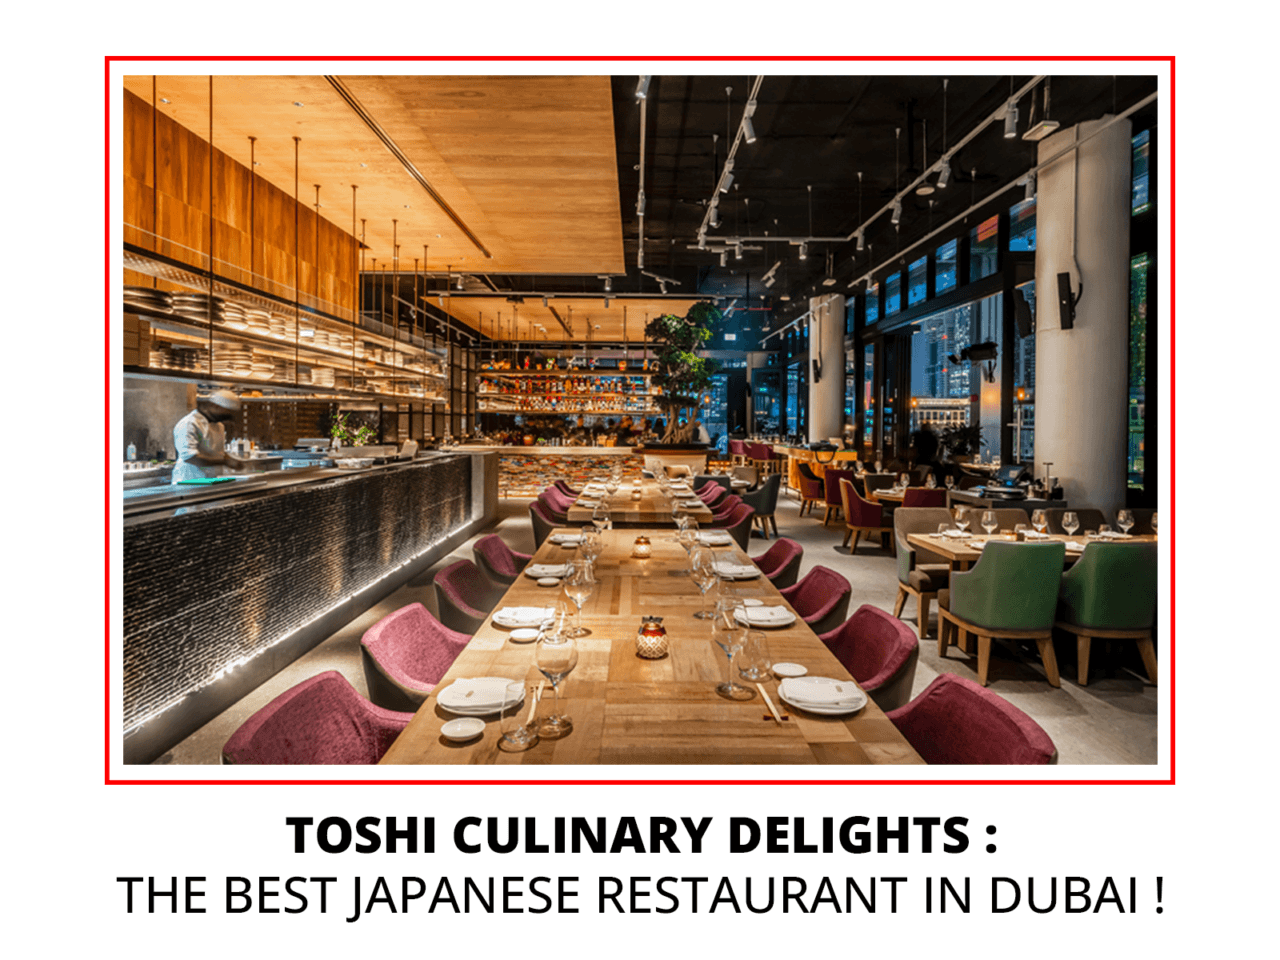 Toshi Culinary Delights The Best Japanese Restaurant in Dubai!